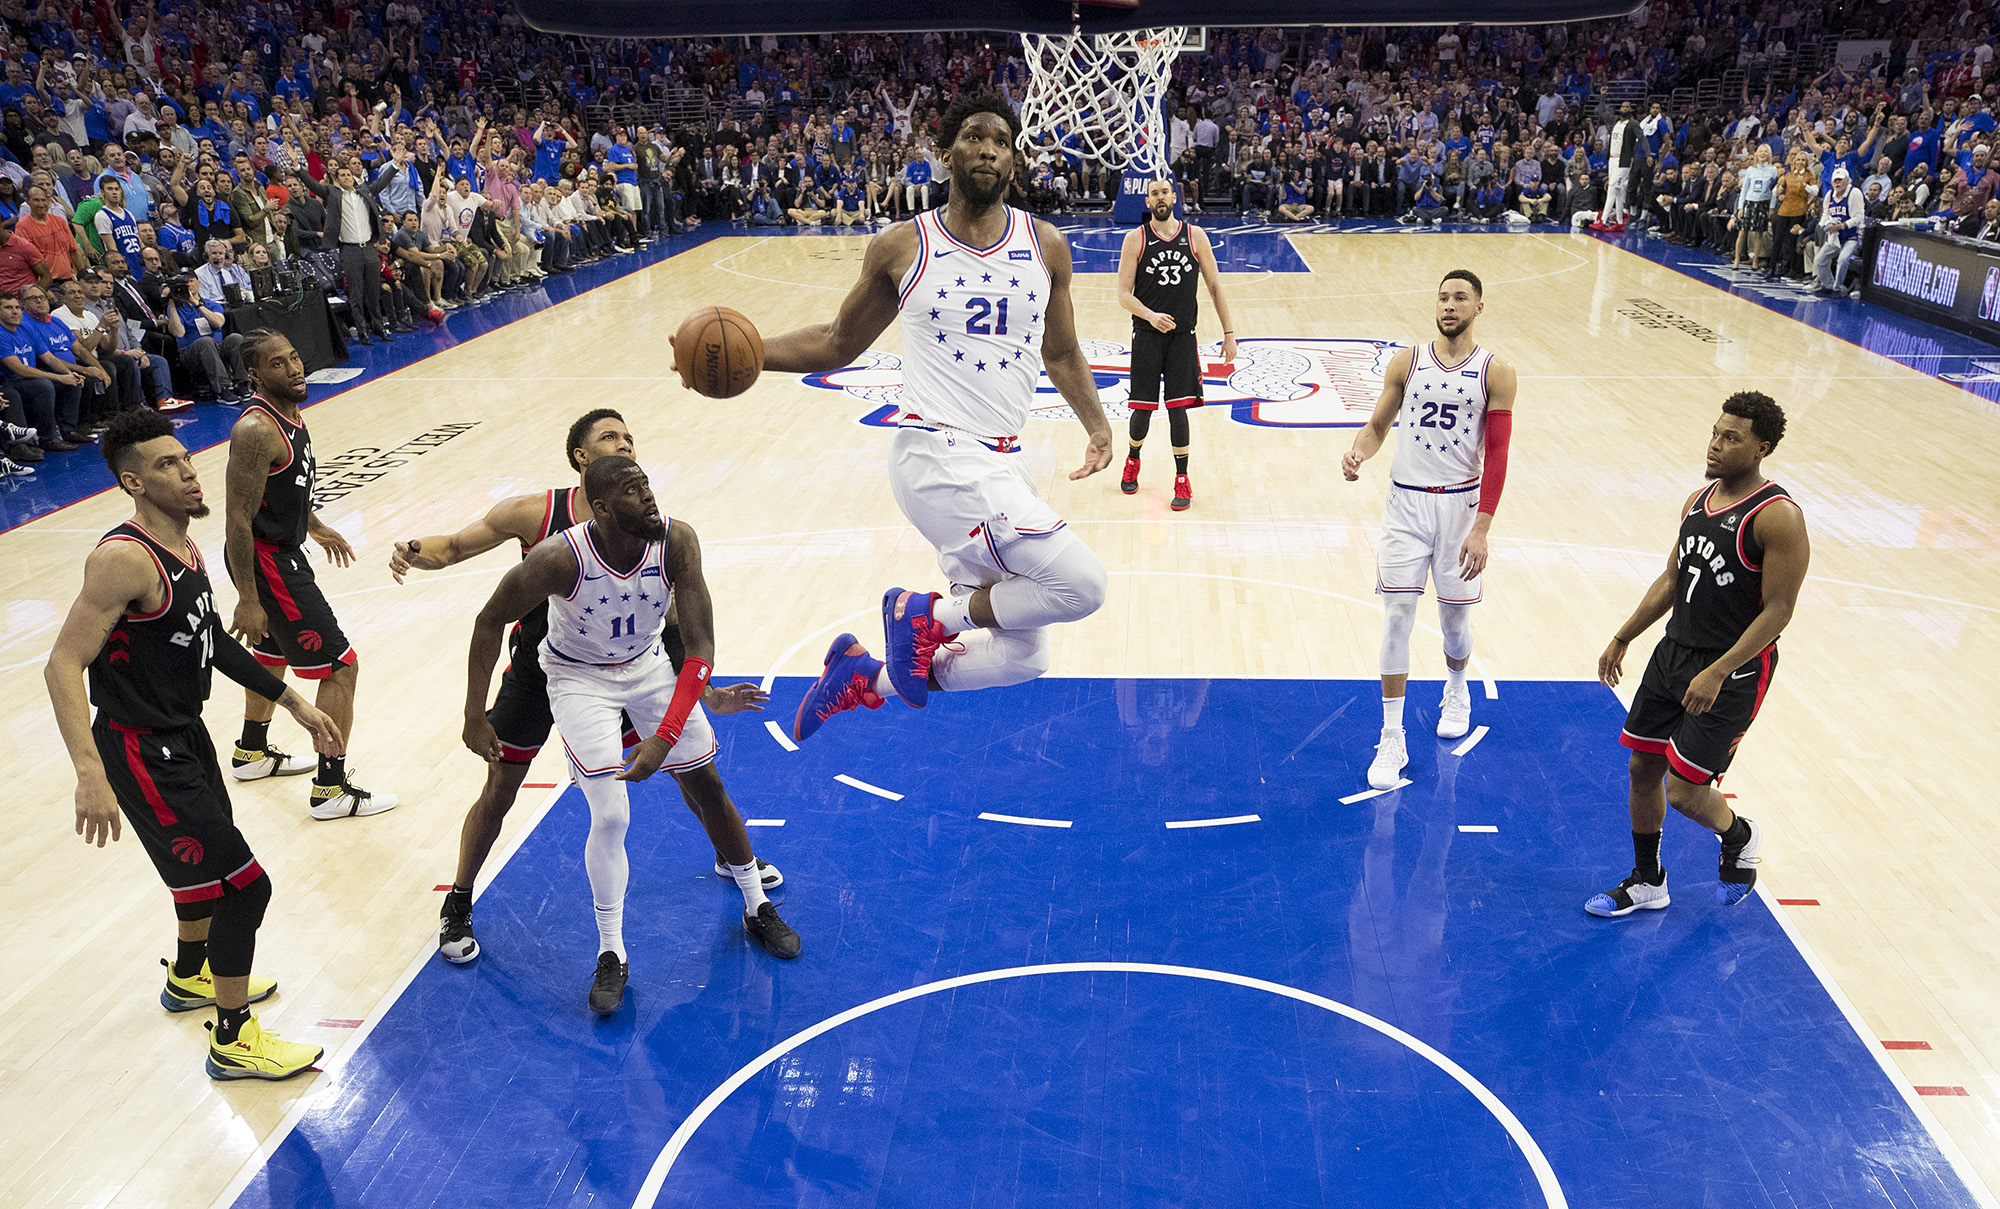 Joel Embiid&nbsp;of the Philadelphia 76ers dunks the ball against the Toronto Raptors in the fourth quarter of Game Three of the Eastern Conference Semifinals in Philadelphia&nbsp;on May 2, 2019.